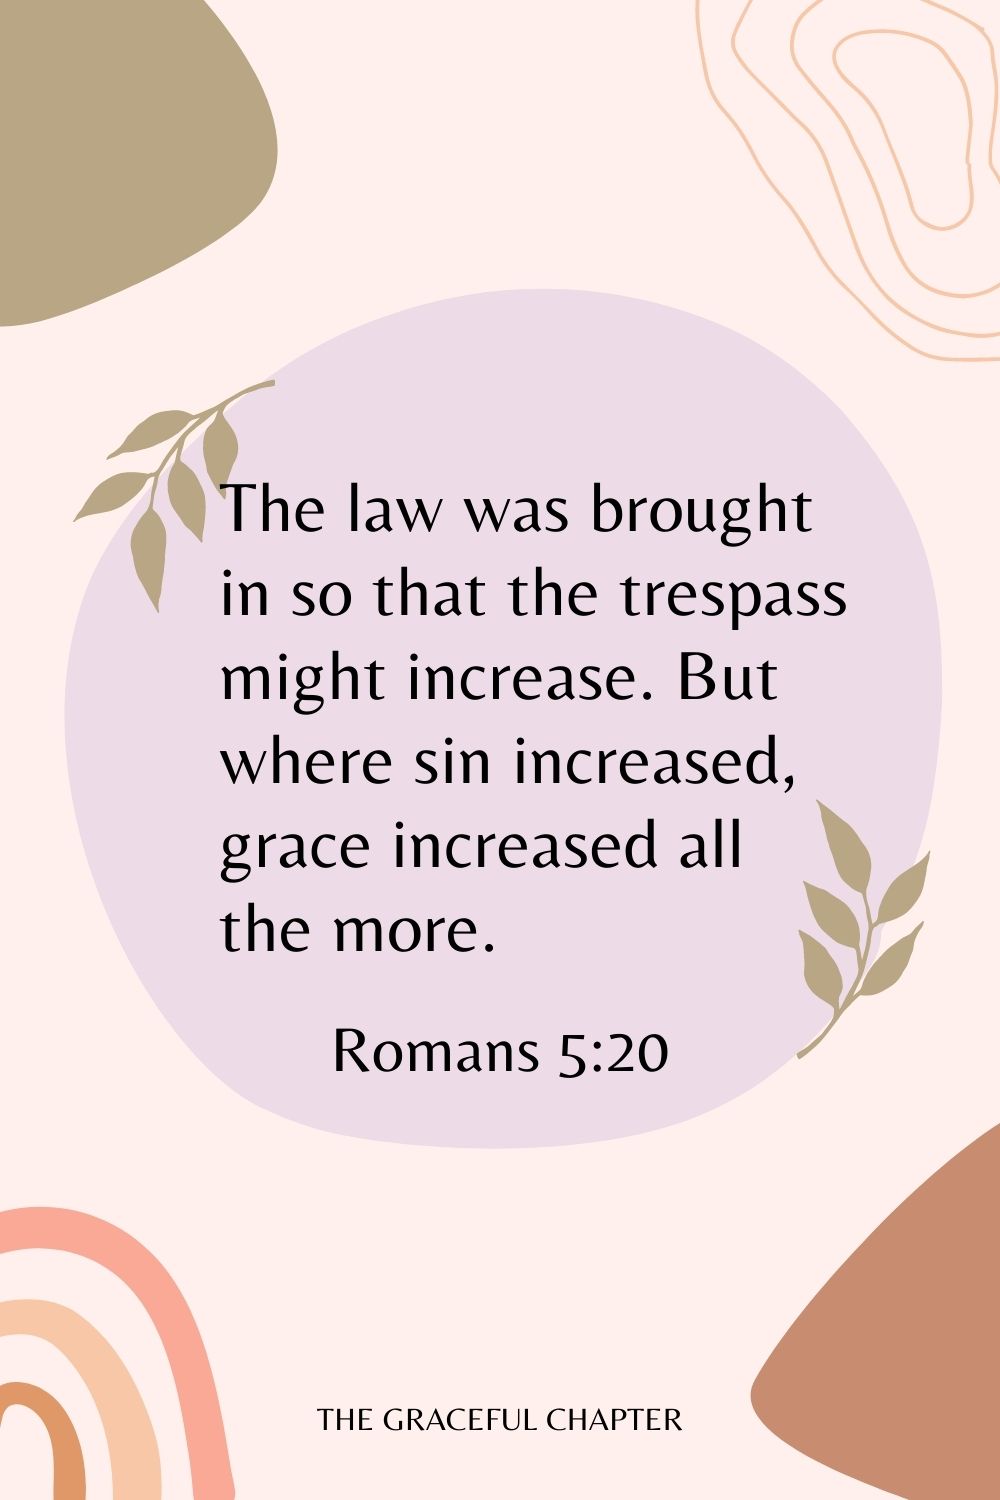 The law was brought in so that the trespass might increase. But where sin increased, grace increased all the more. Romans 5:20